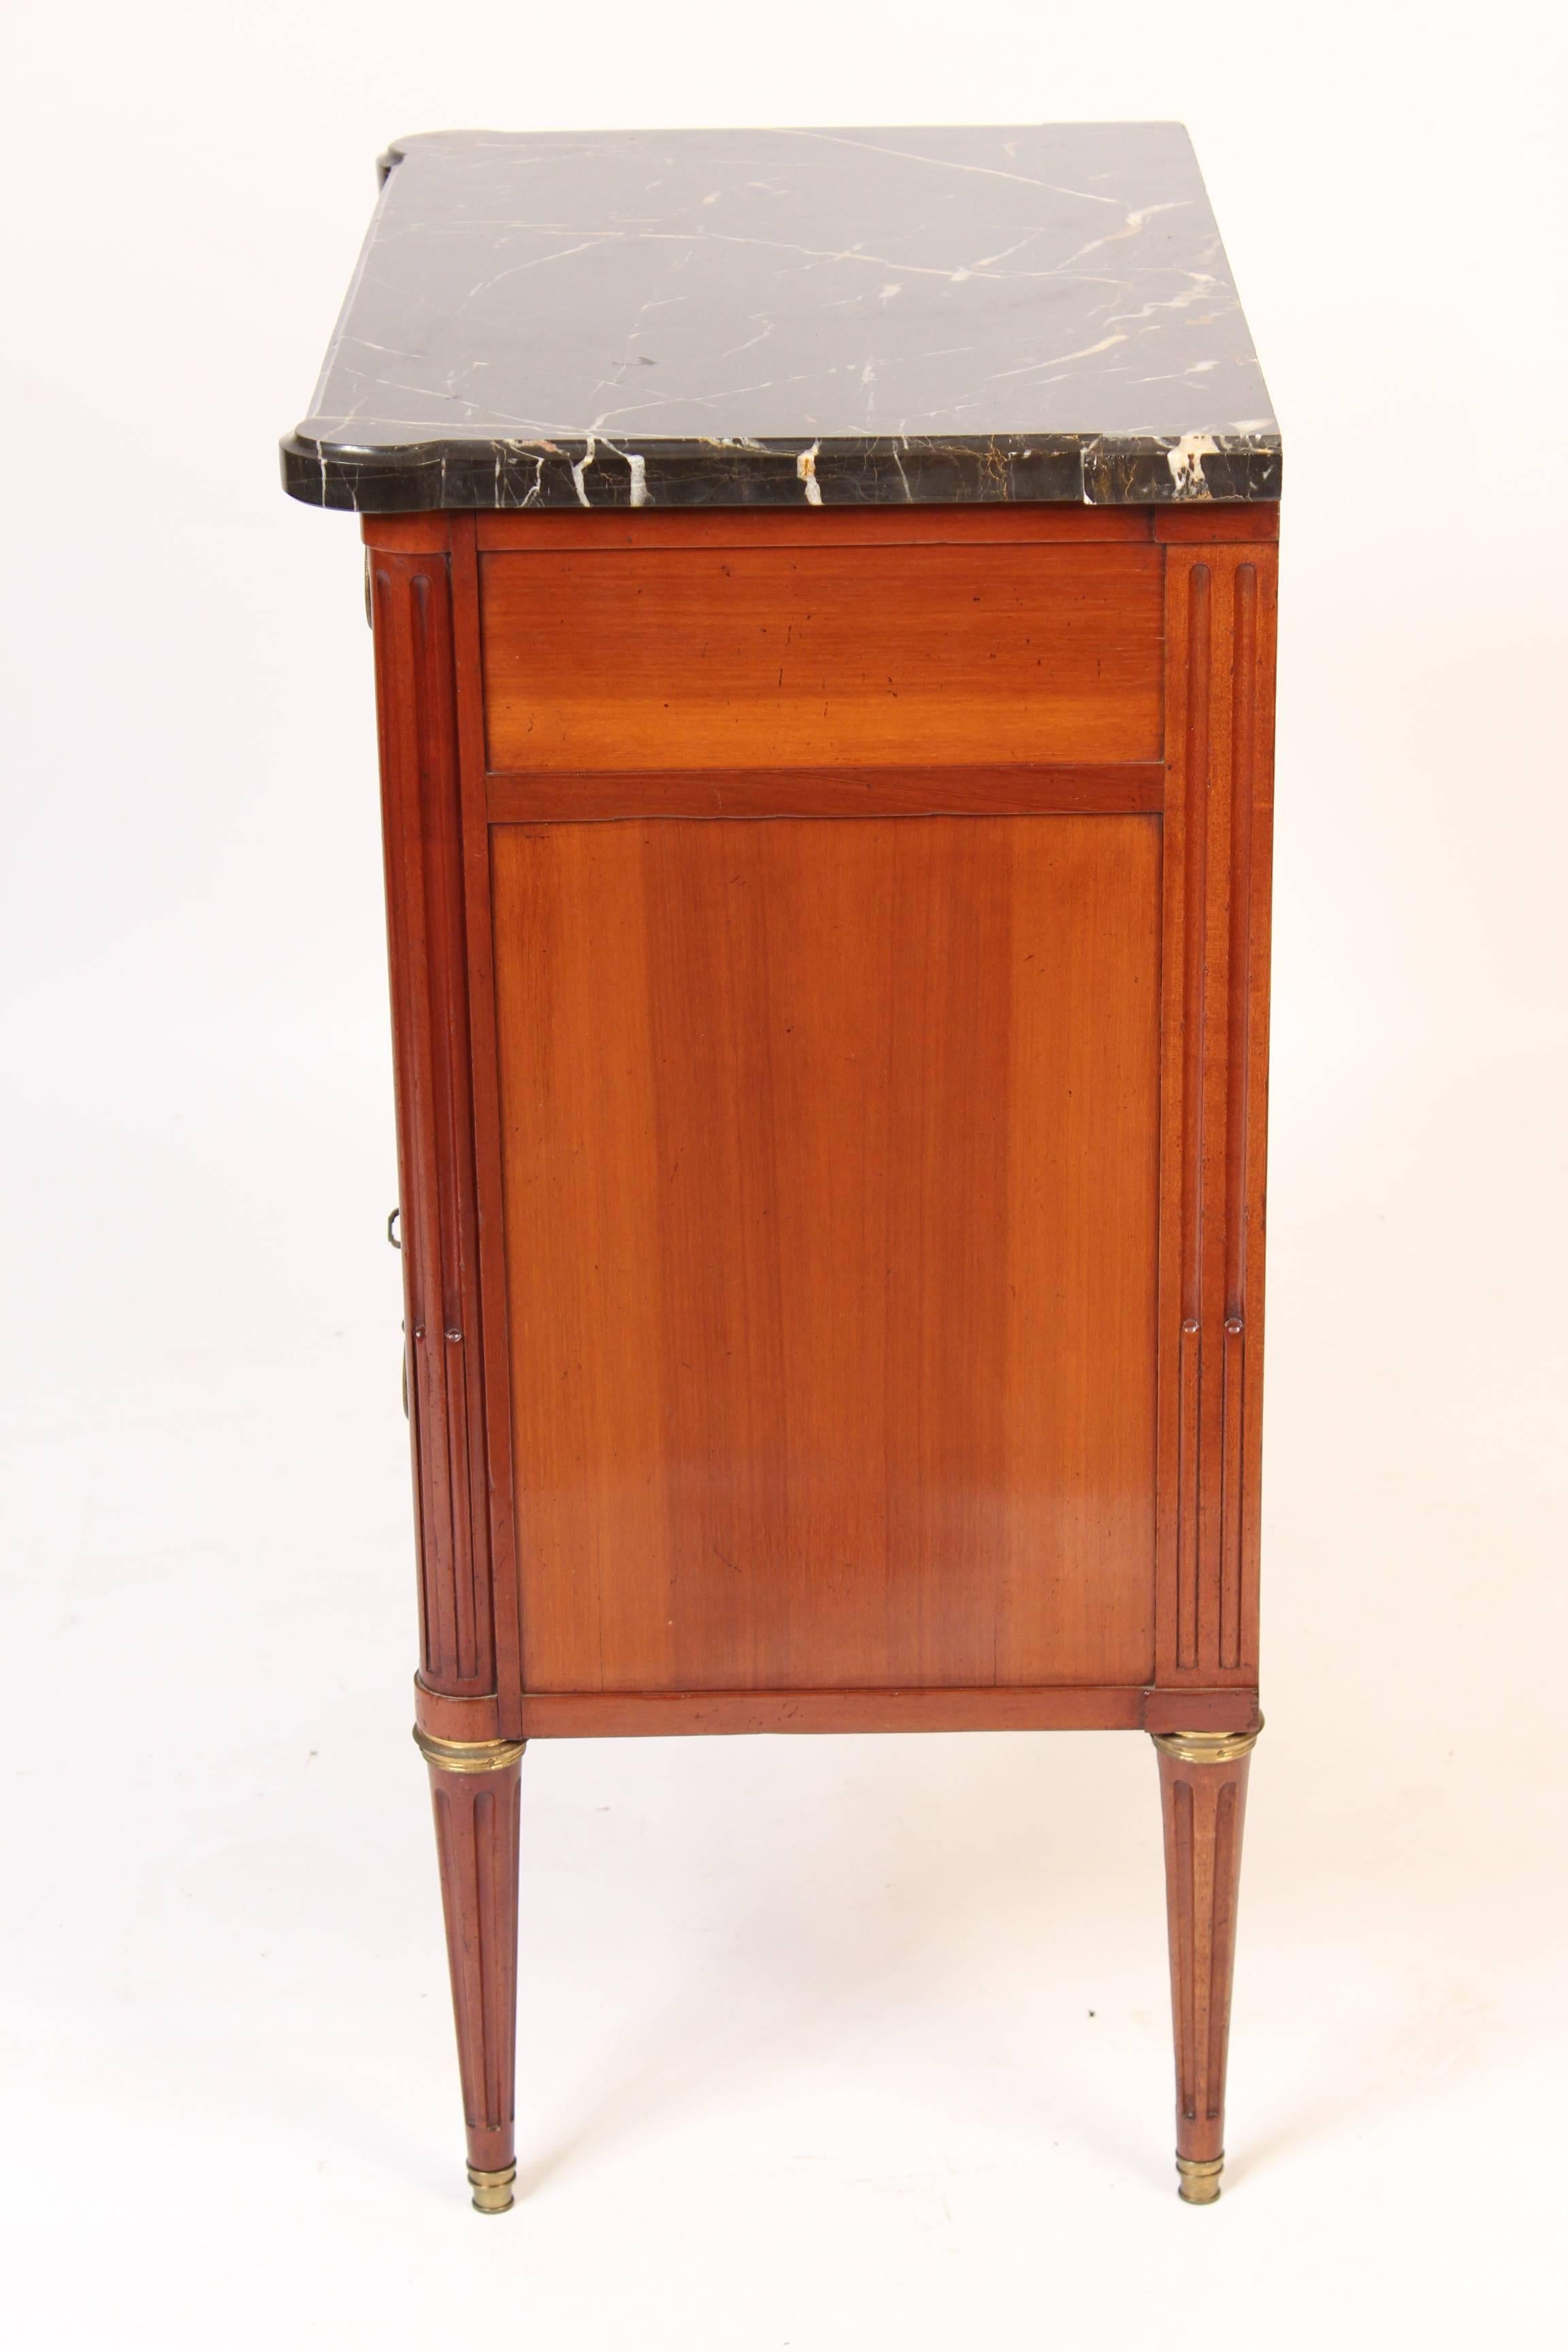 Louis XVI style mahogany chest of drawers with brass hardware and a marble top, made in France, mid-20th century.